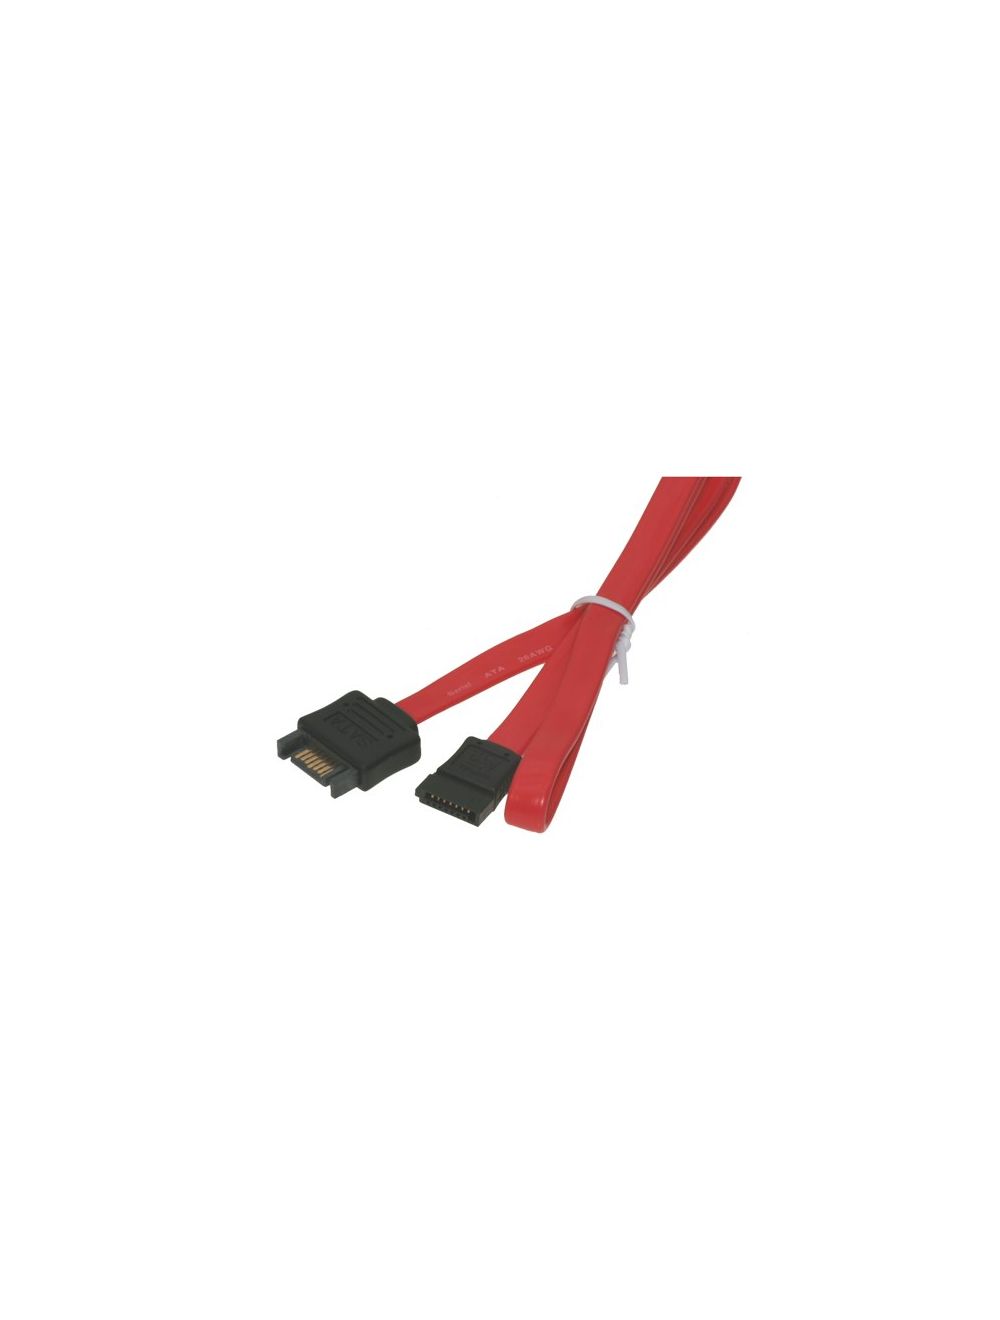 Coolgear 12 SATA Data Cable Extension Male to Female 